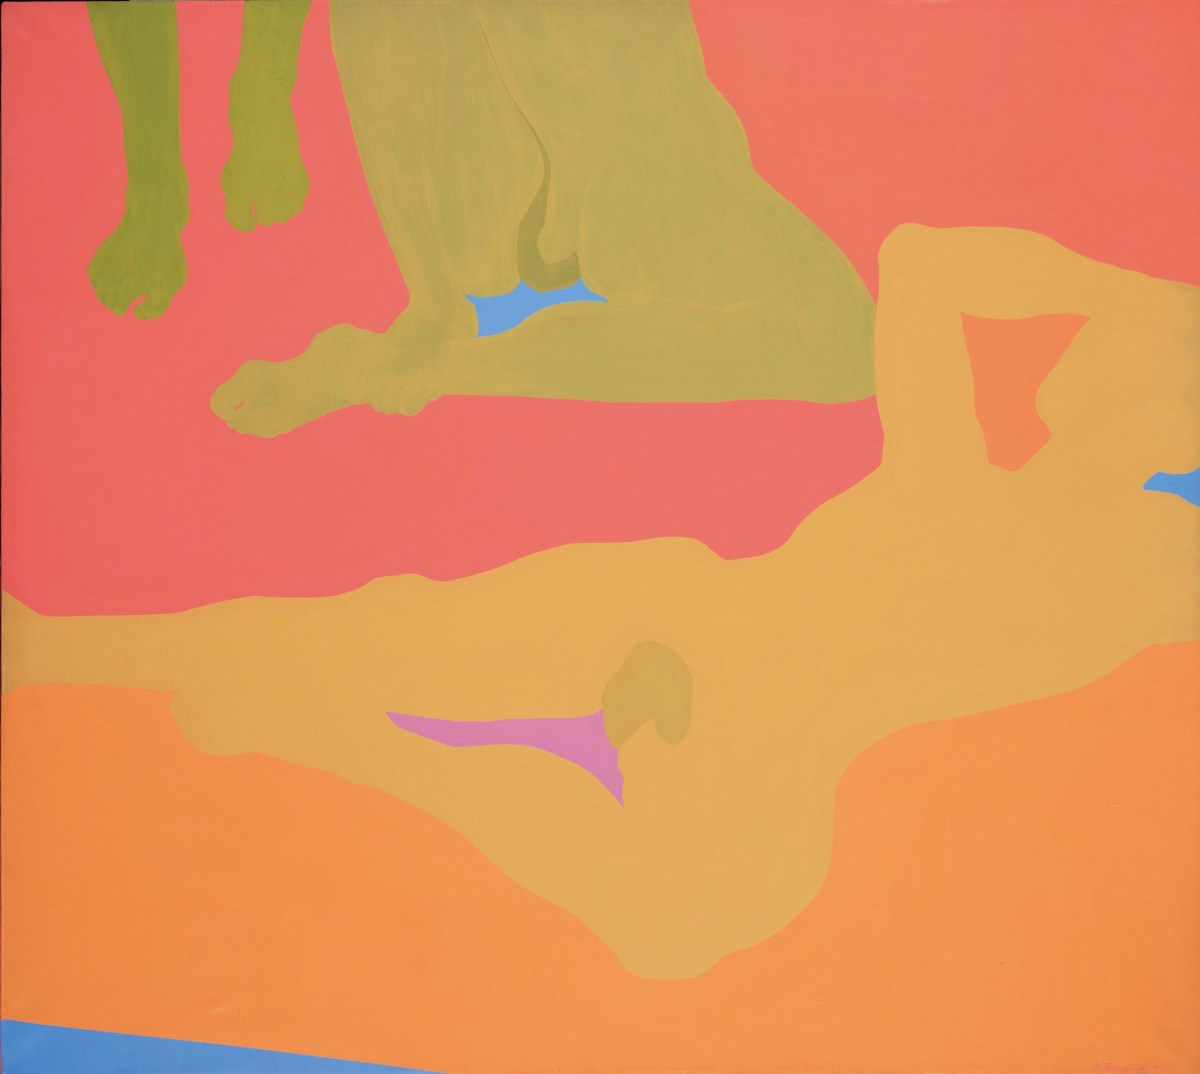 An abstract painting done in warm, muted tones of tangerine, pink, and beige, that depicts bodily forms. One lays down with one leg extended and the other bent--the negative space between the legs is painted in a bright lavender color. The genital area is a darkened abstract circle. In the top left green feet appear next to another form in a sitting position, the negative space painted bright baby blue and the genital area also darkened.